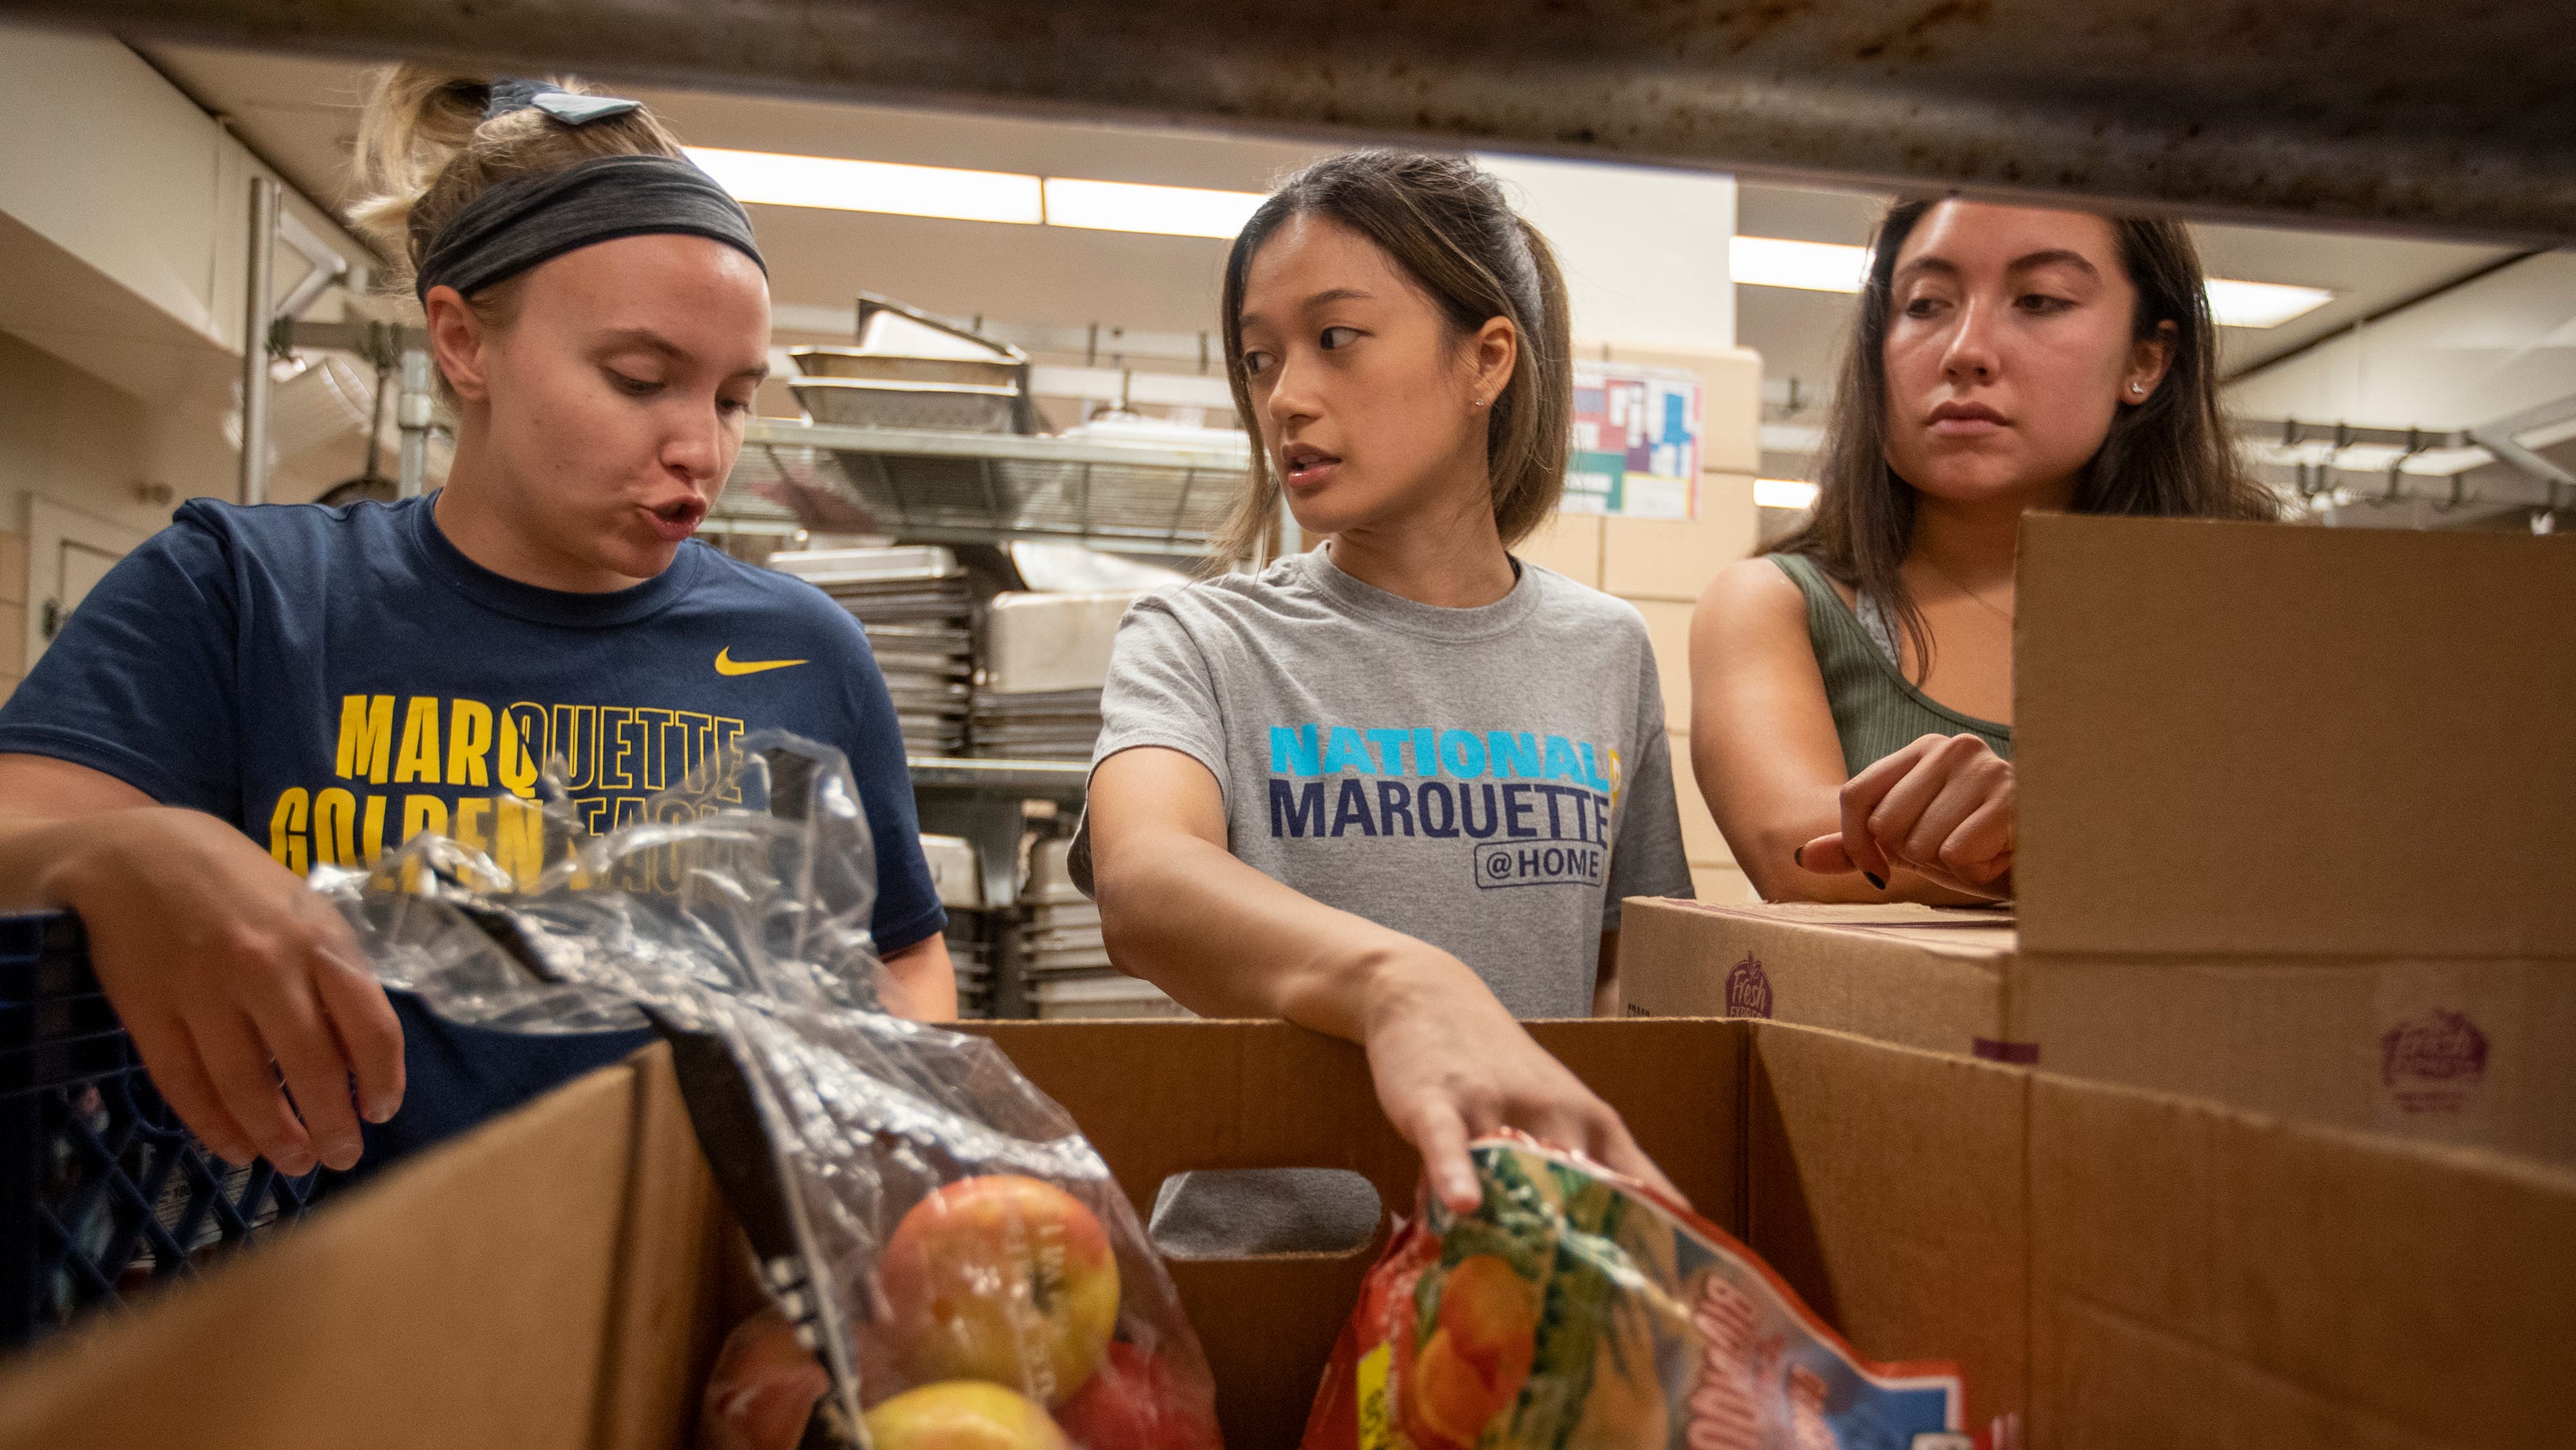 Food insecurity among college students worsens during pandemic